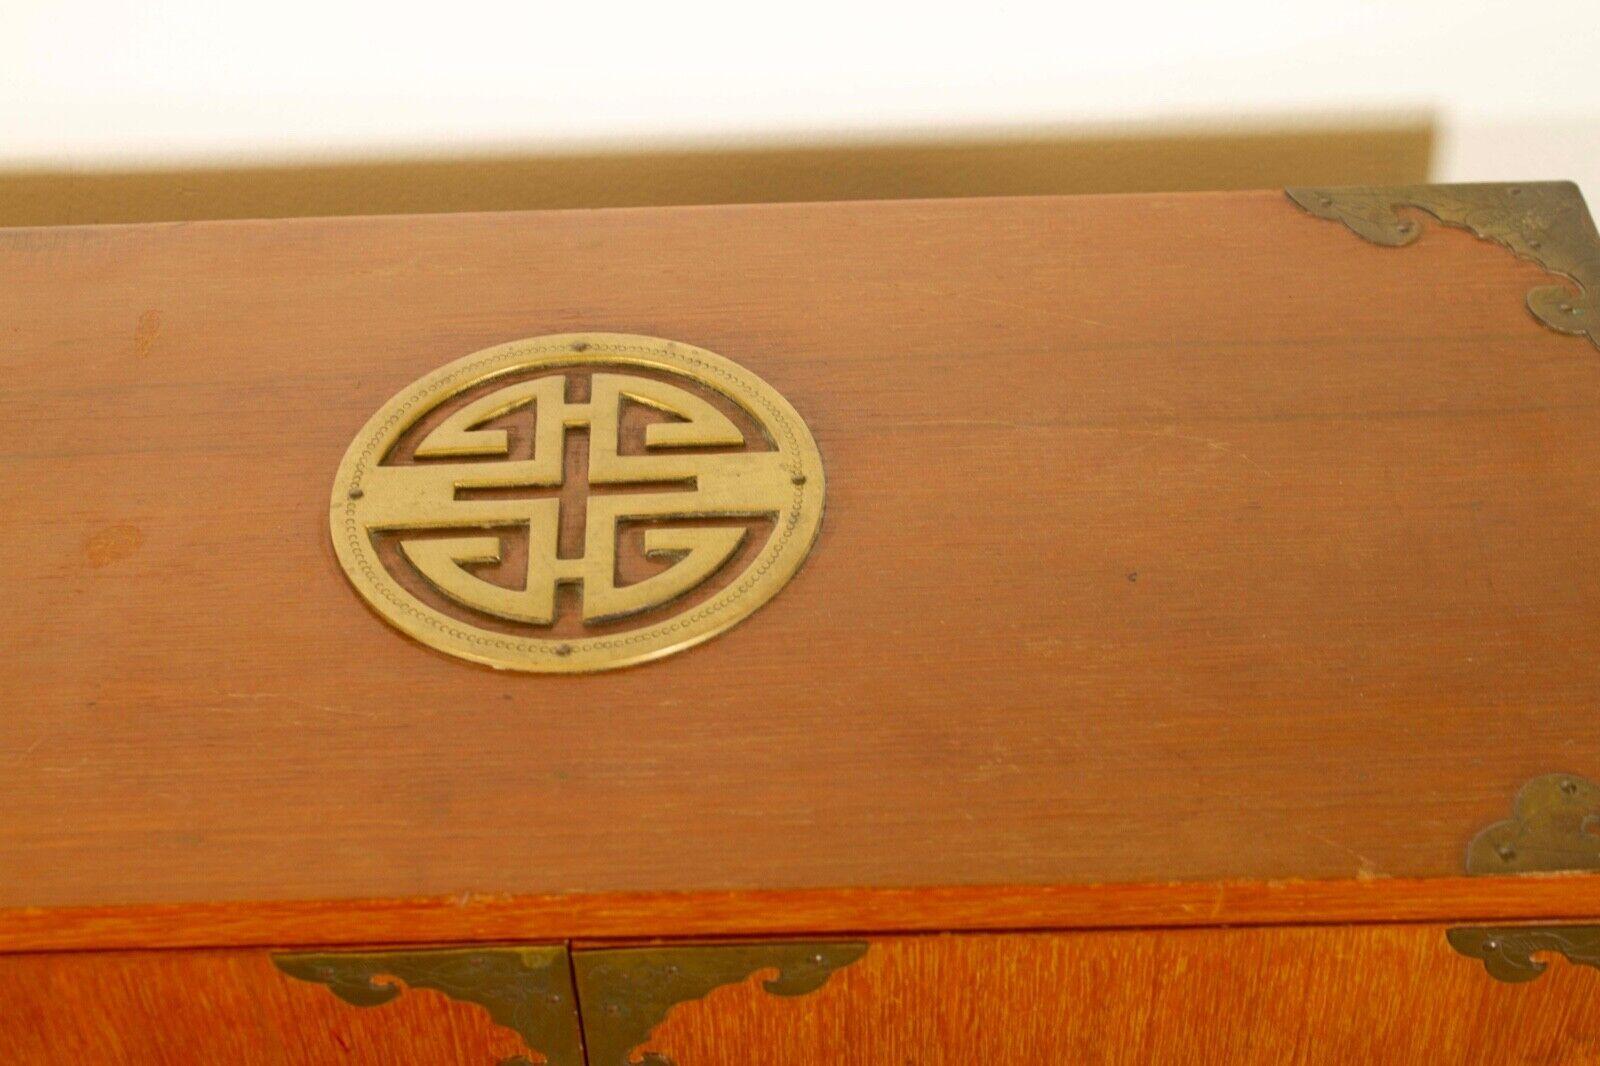 20th Century Antique Asian Jewelry or Curio Wood Box with Brass Ornate Details with Drawers